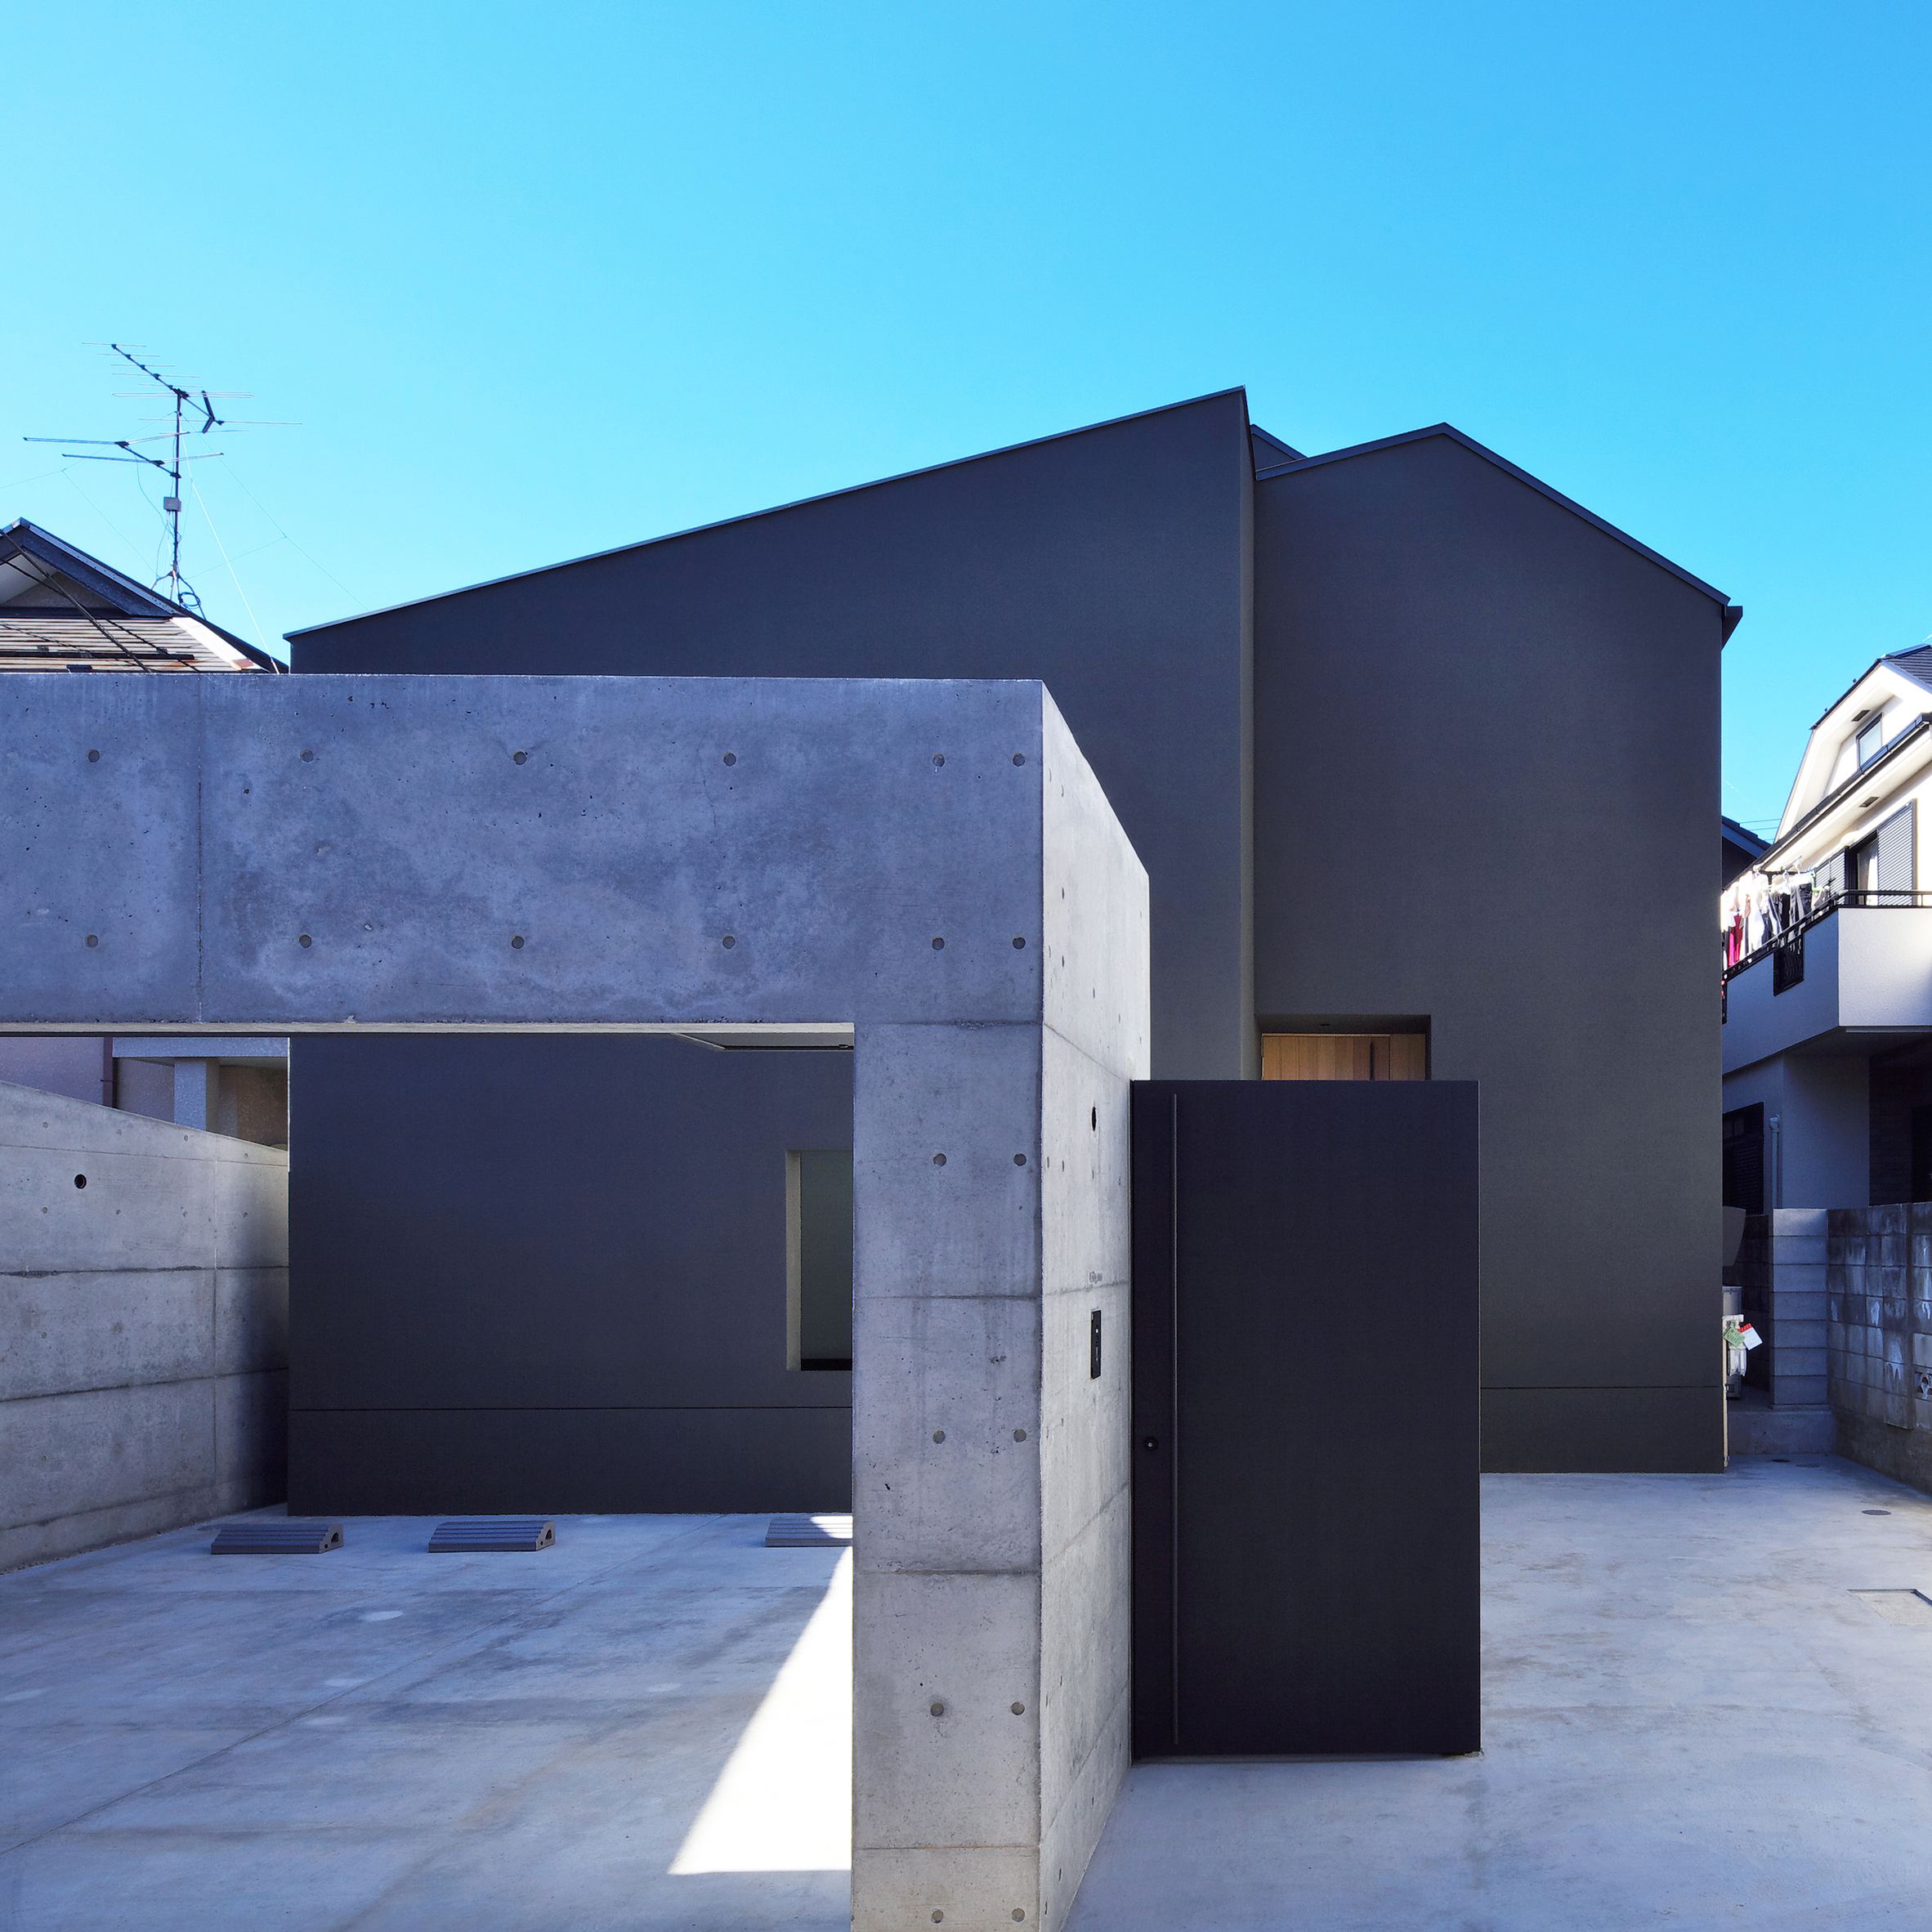 Japanese houses: House of Fluctuations by Satoru Hirota Architects